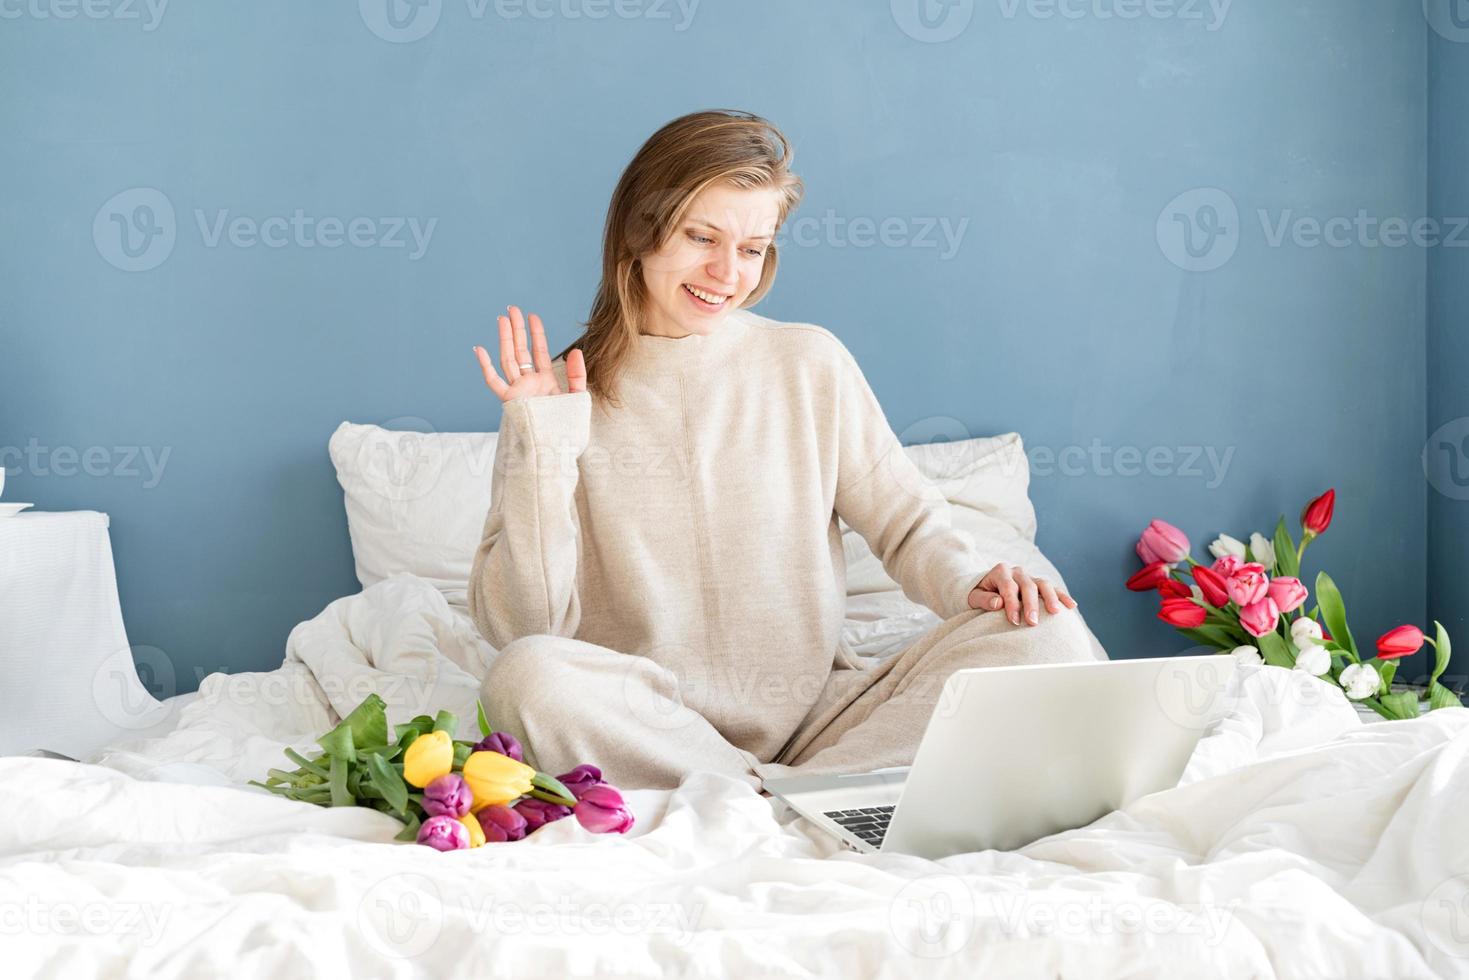 woman sitting on the bed wearing pajamas chatting on laptop photo